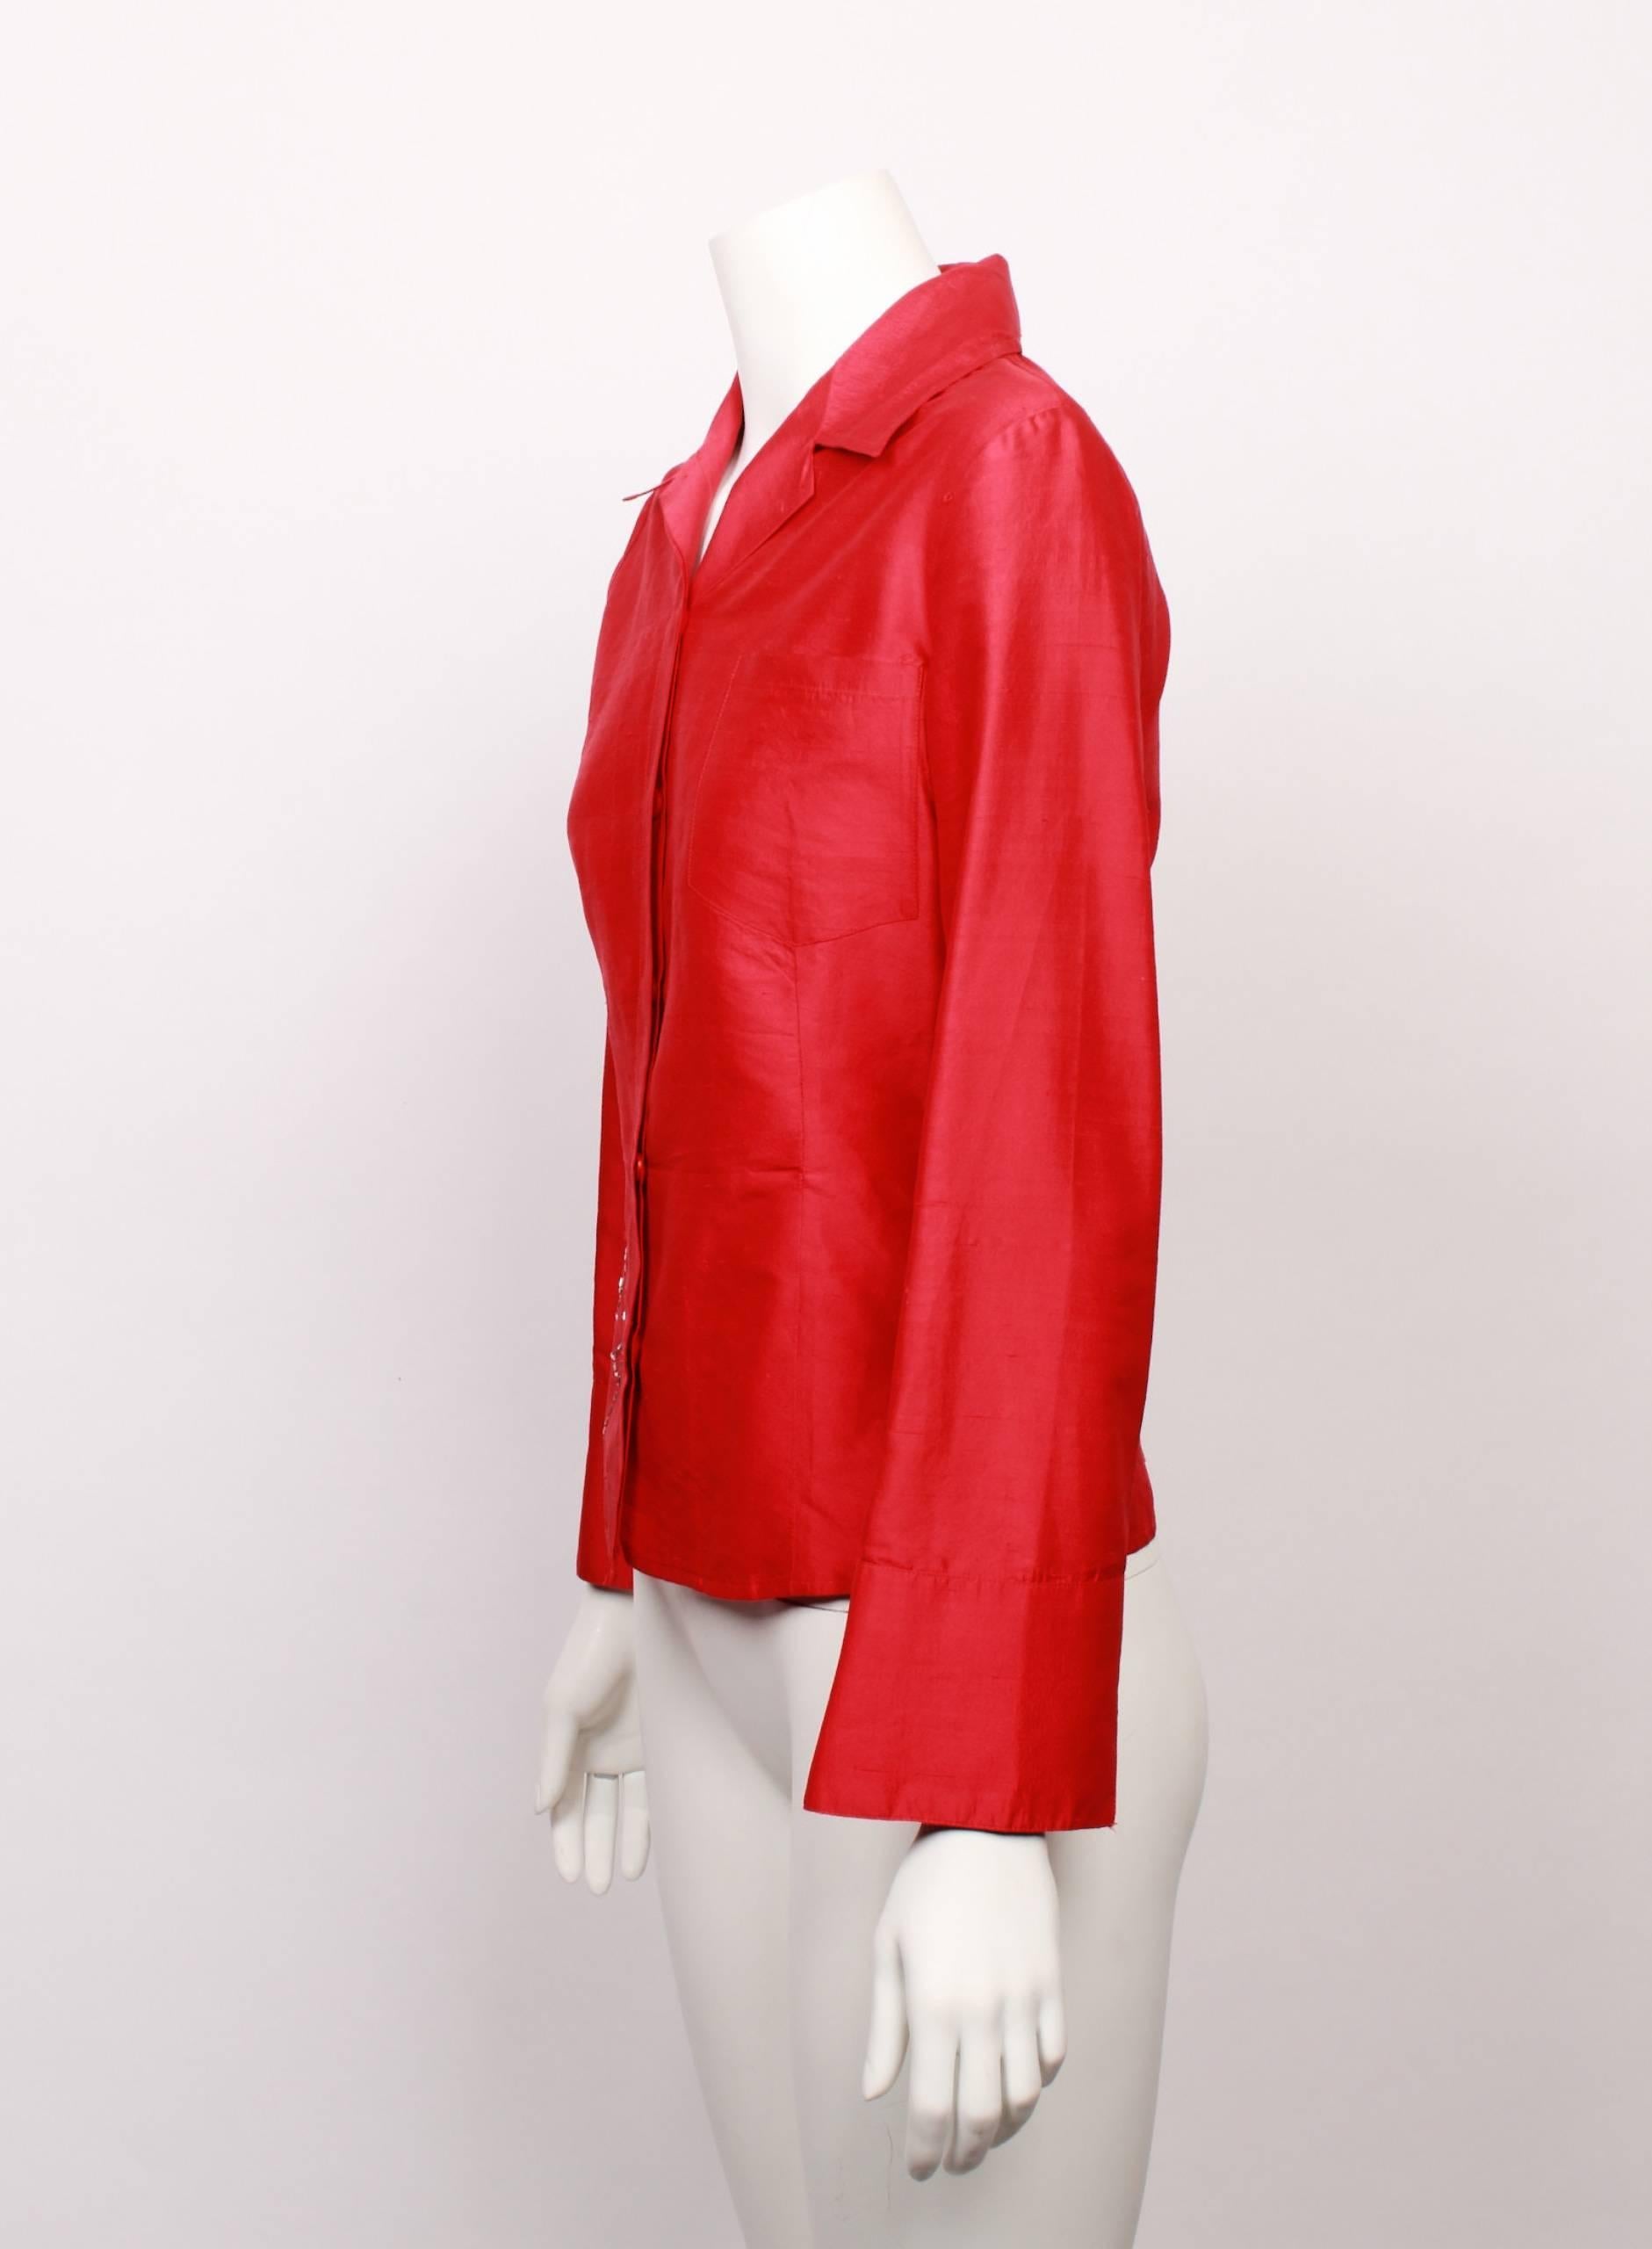 Castelbajac Red Silk Shirt In Good Condition For Sale In Melbourne, Victoria